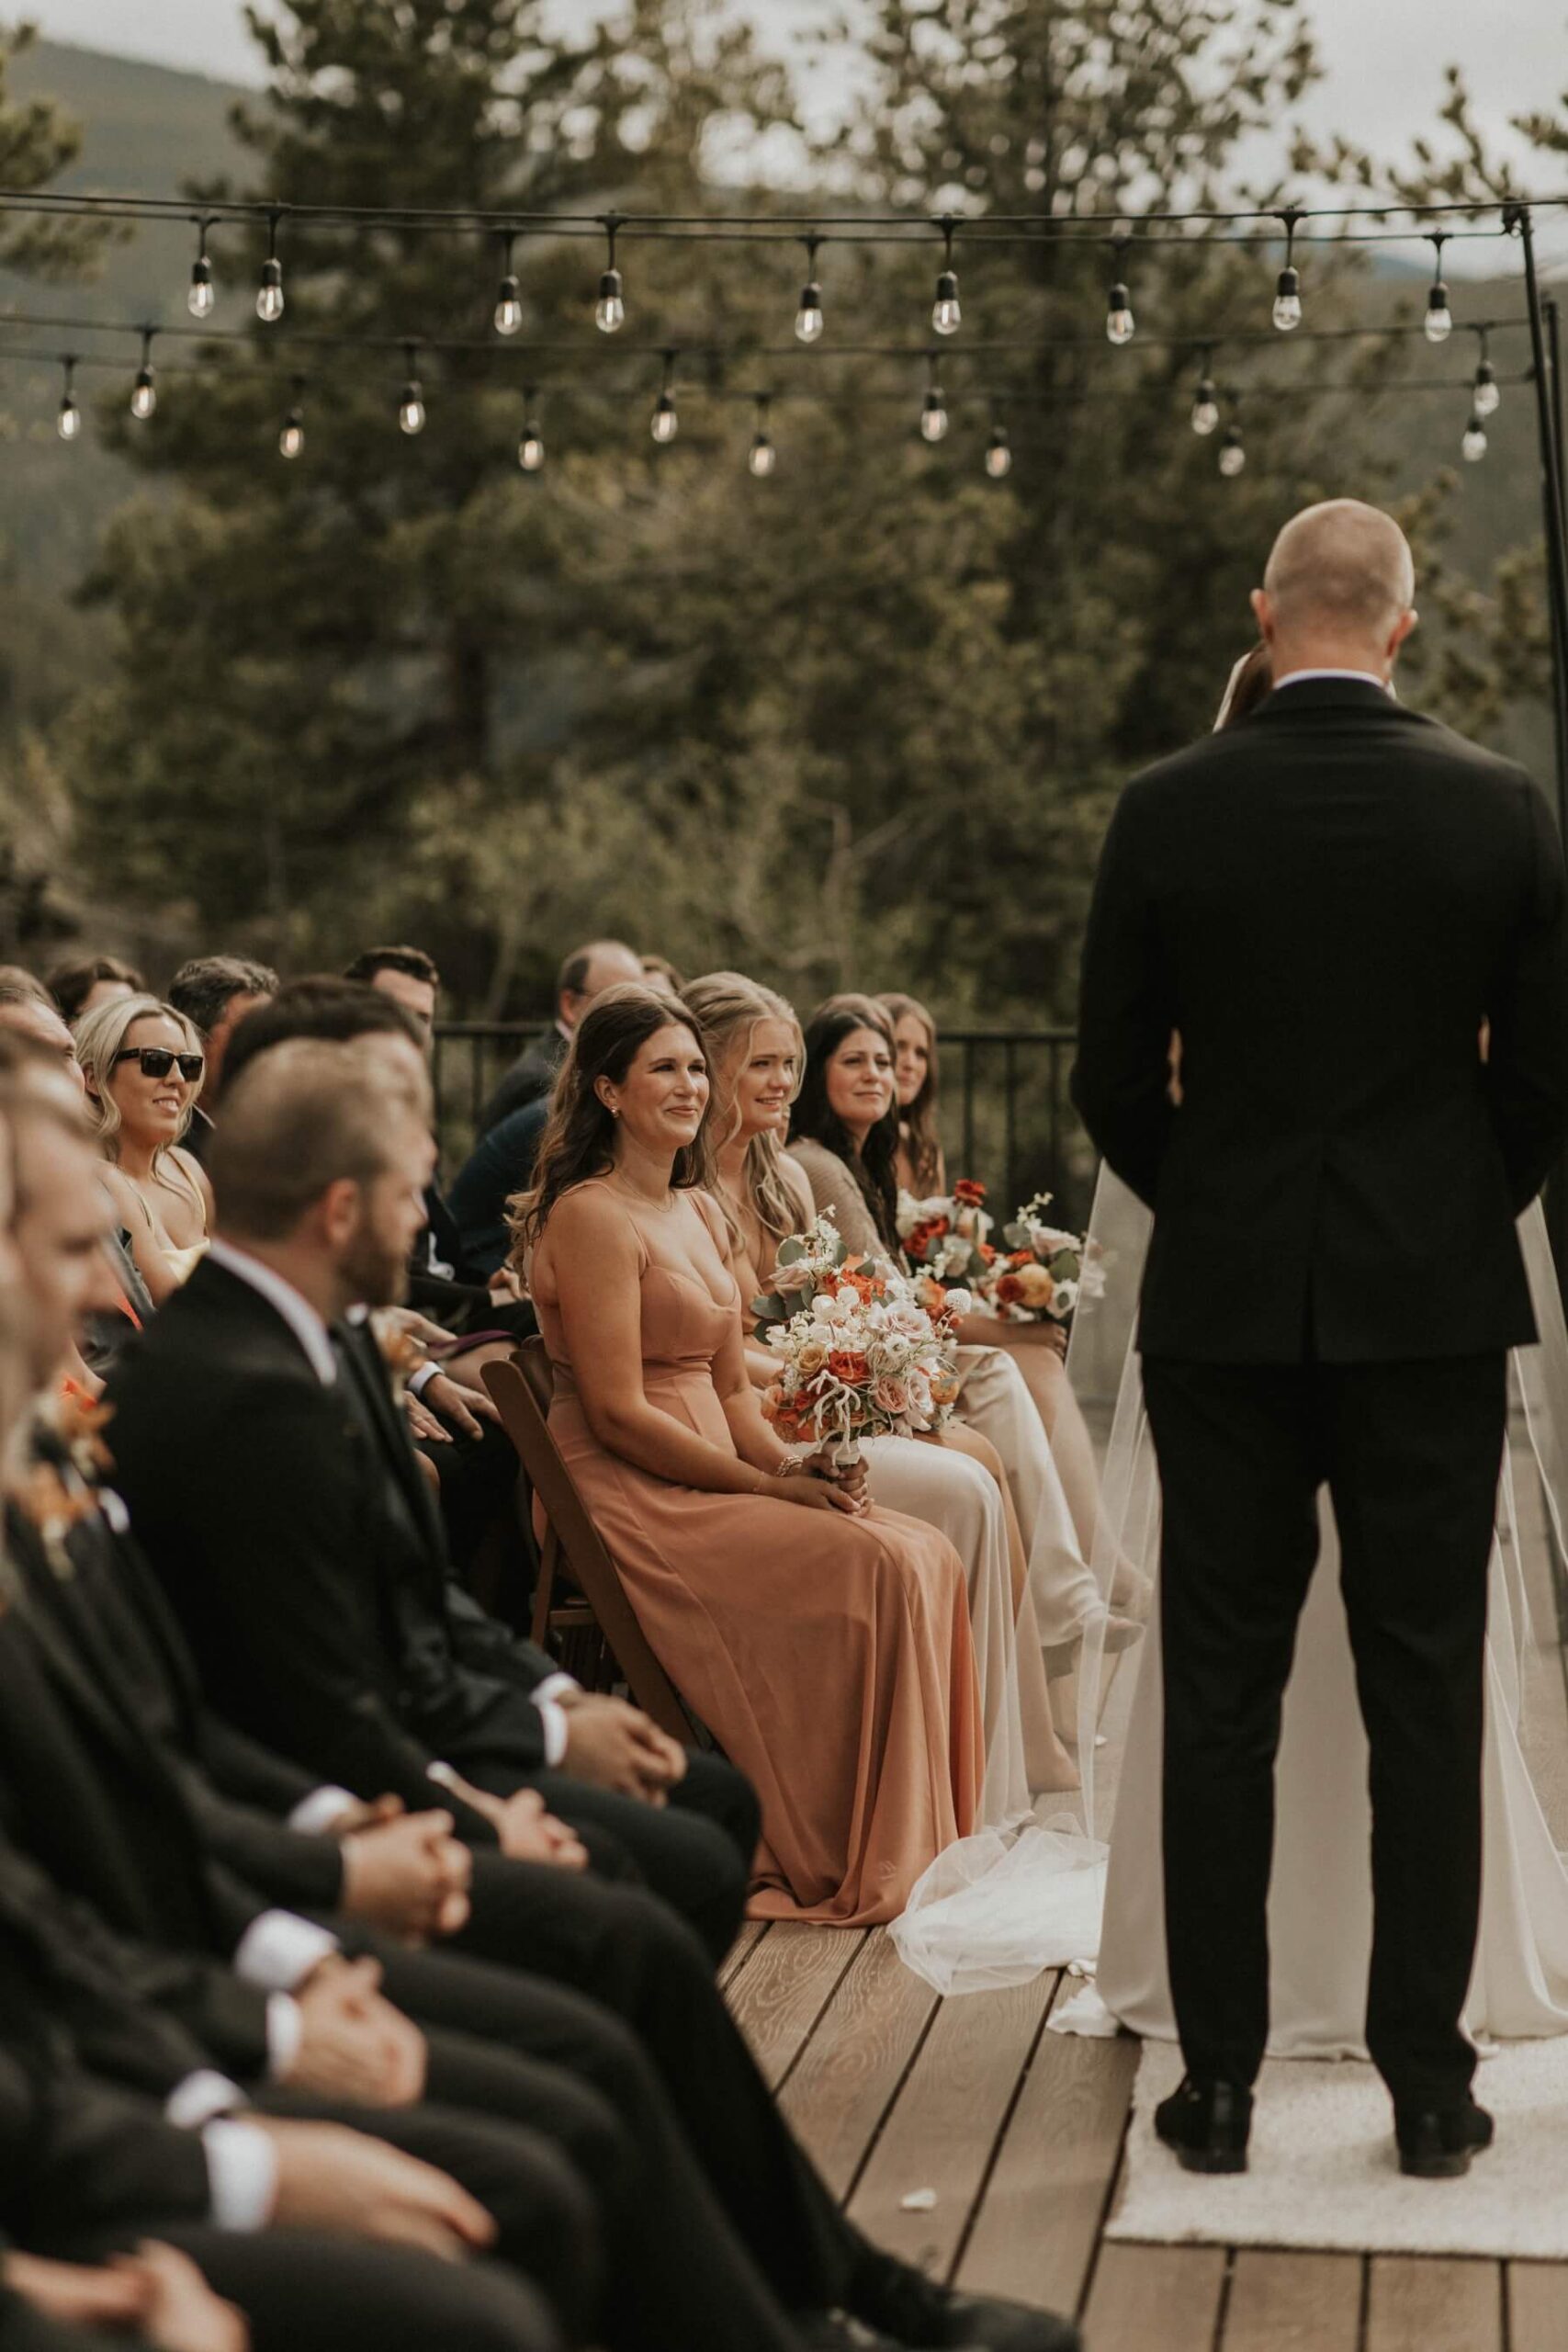 Bridesmaids sitting in front row and watching couple exchange vows